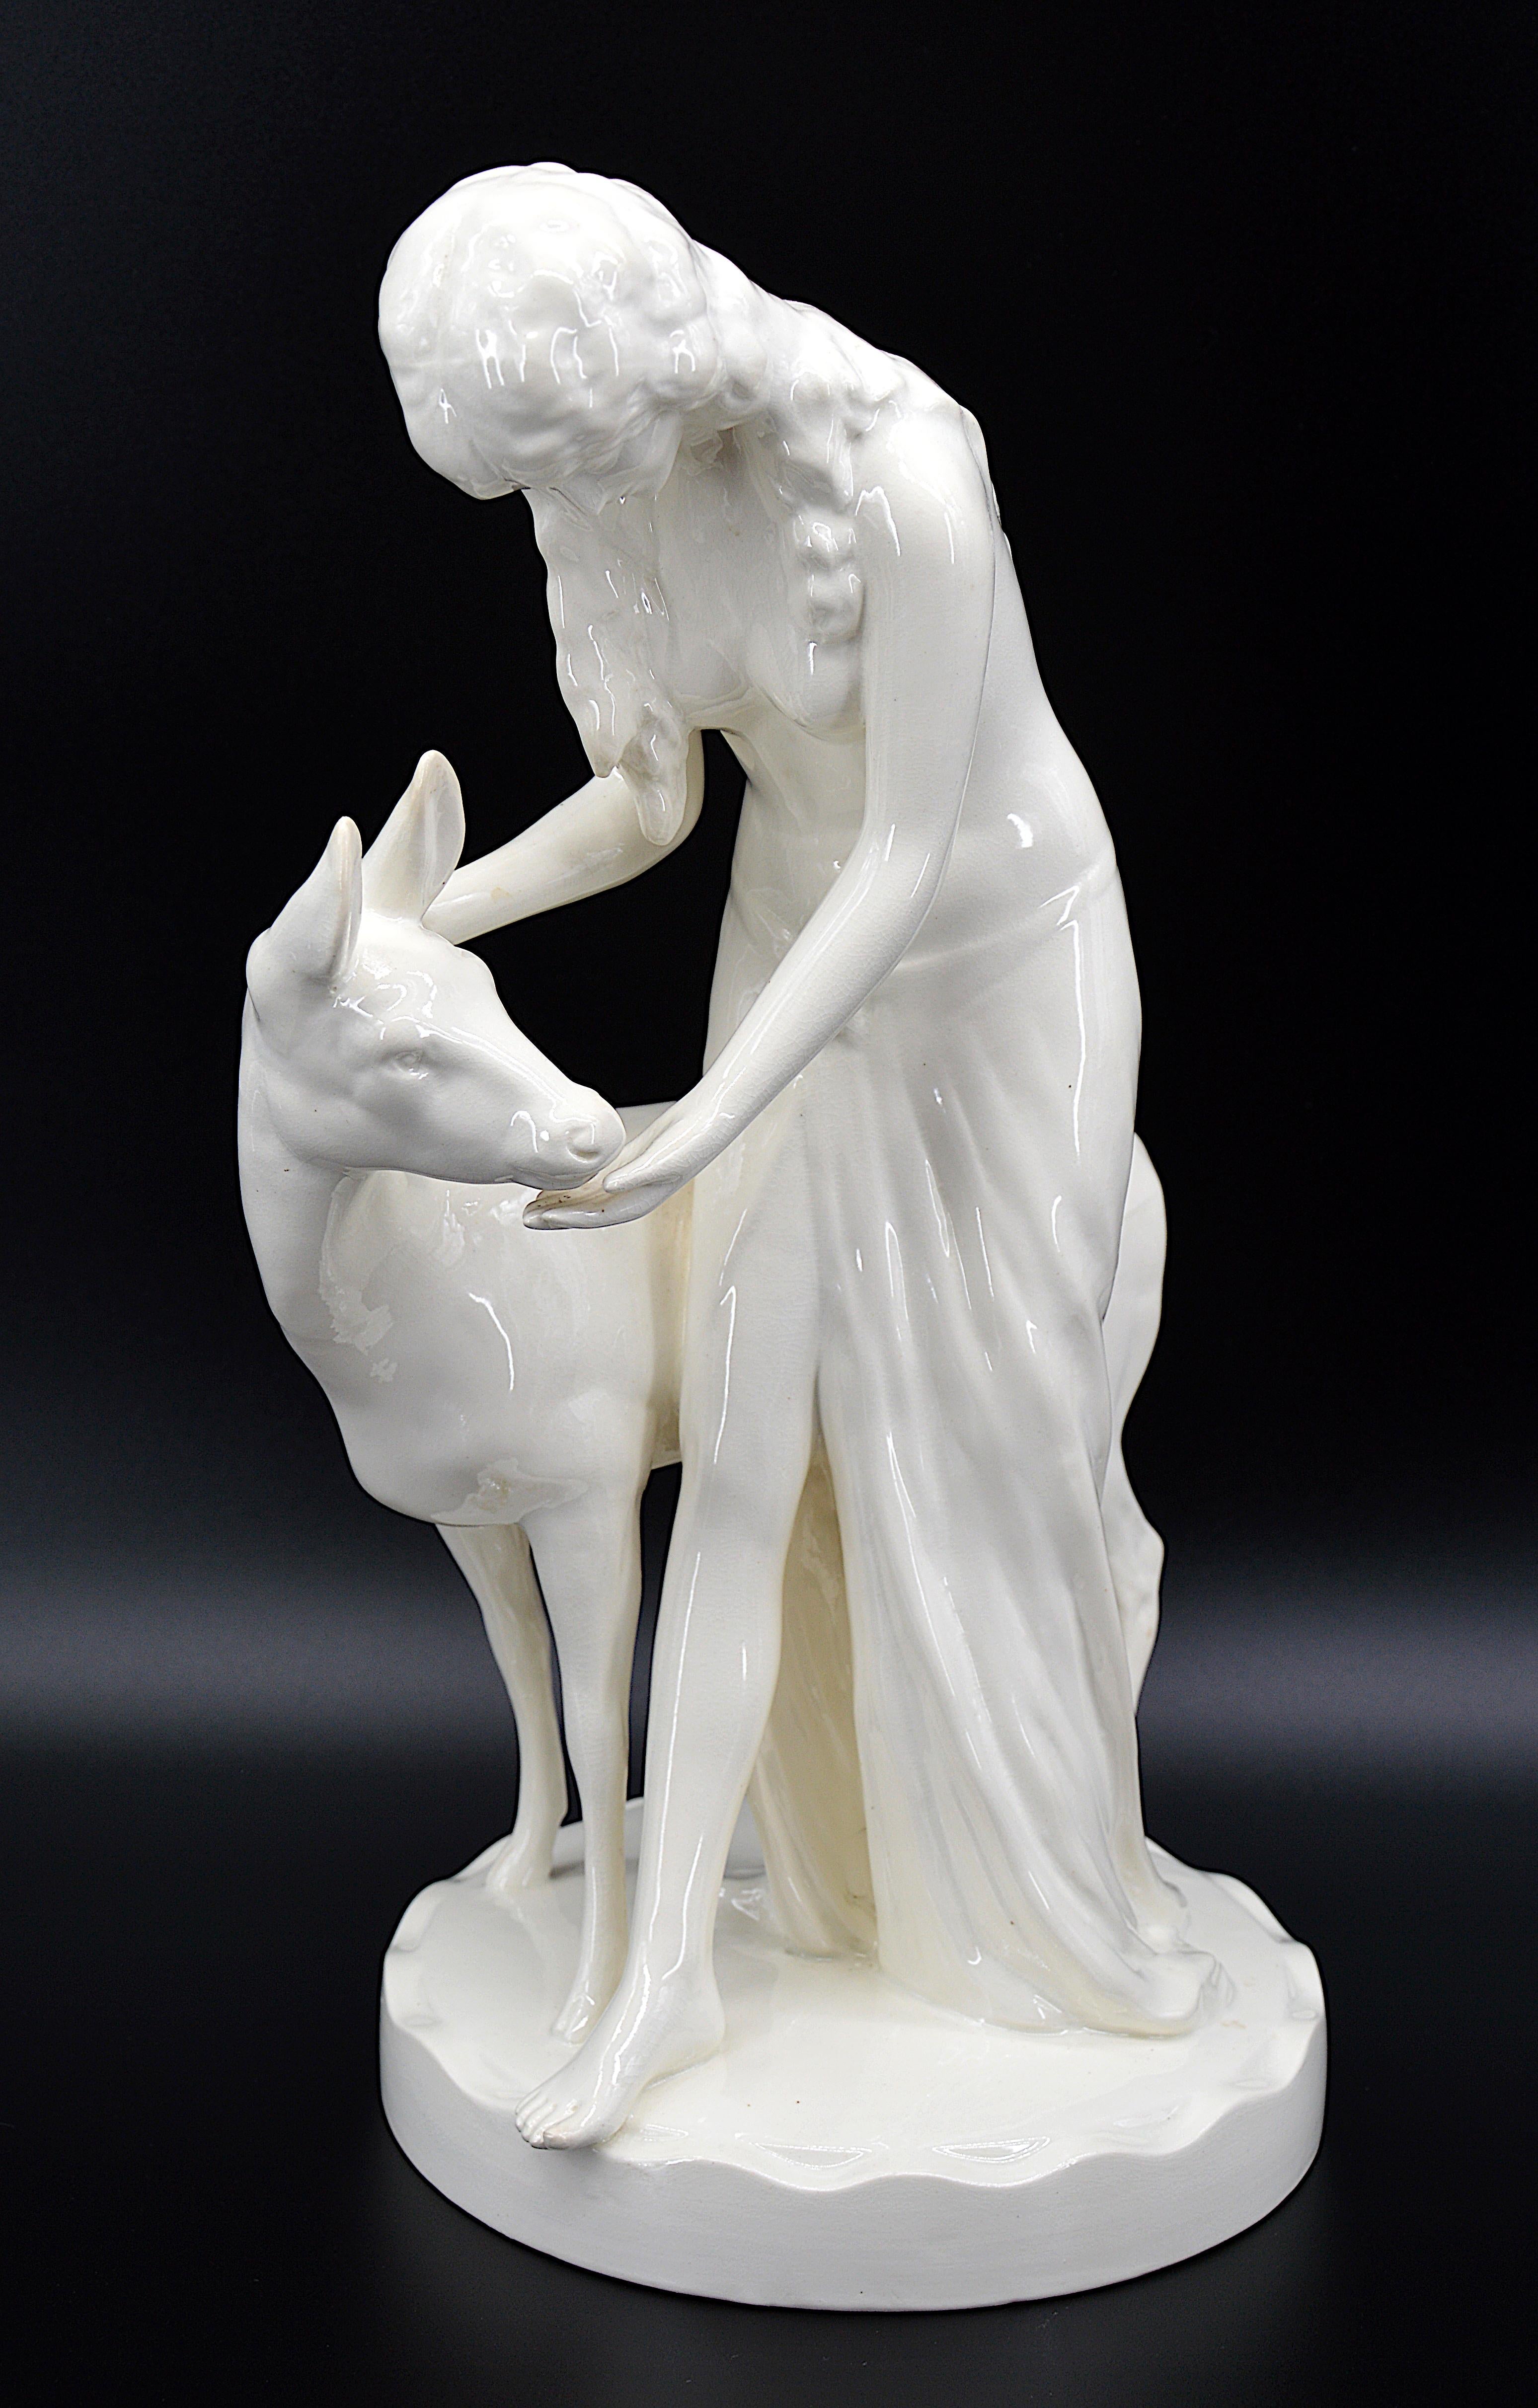 Art Deco Royal Dux Crackle Glaze Ceramic Sculpture, the Young Lady and the Fawn 1918-1925 For Sale